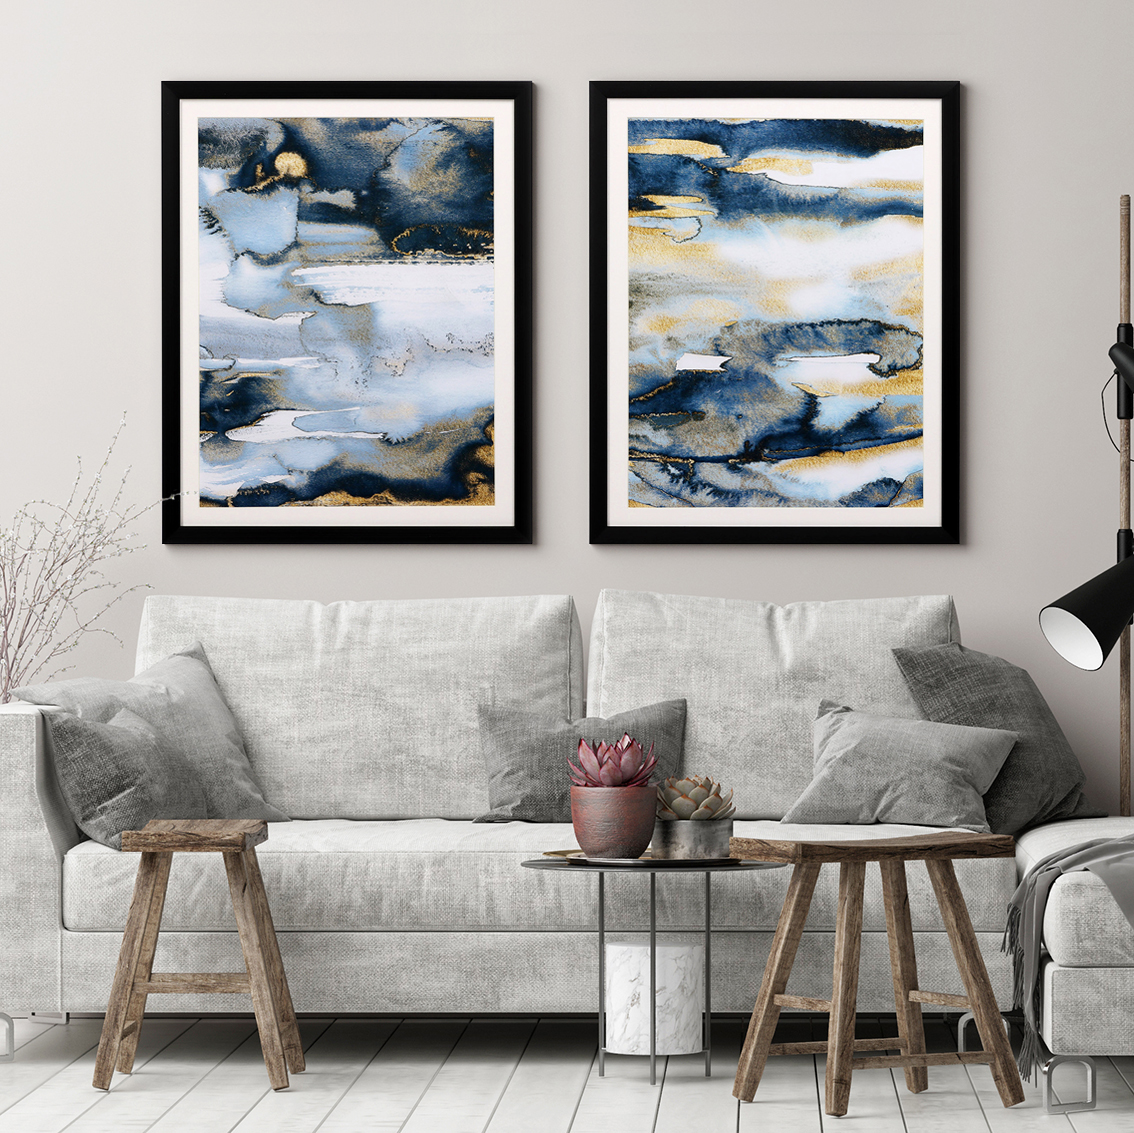 Special Price for White Boho Wall Decor - Framed abstract watercolor blue and gold wall art – Jane Waytt